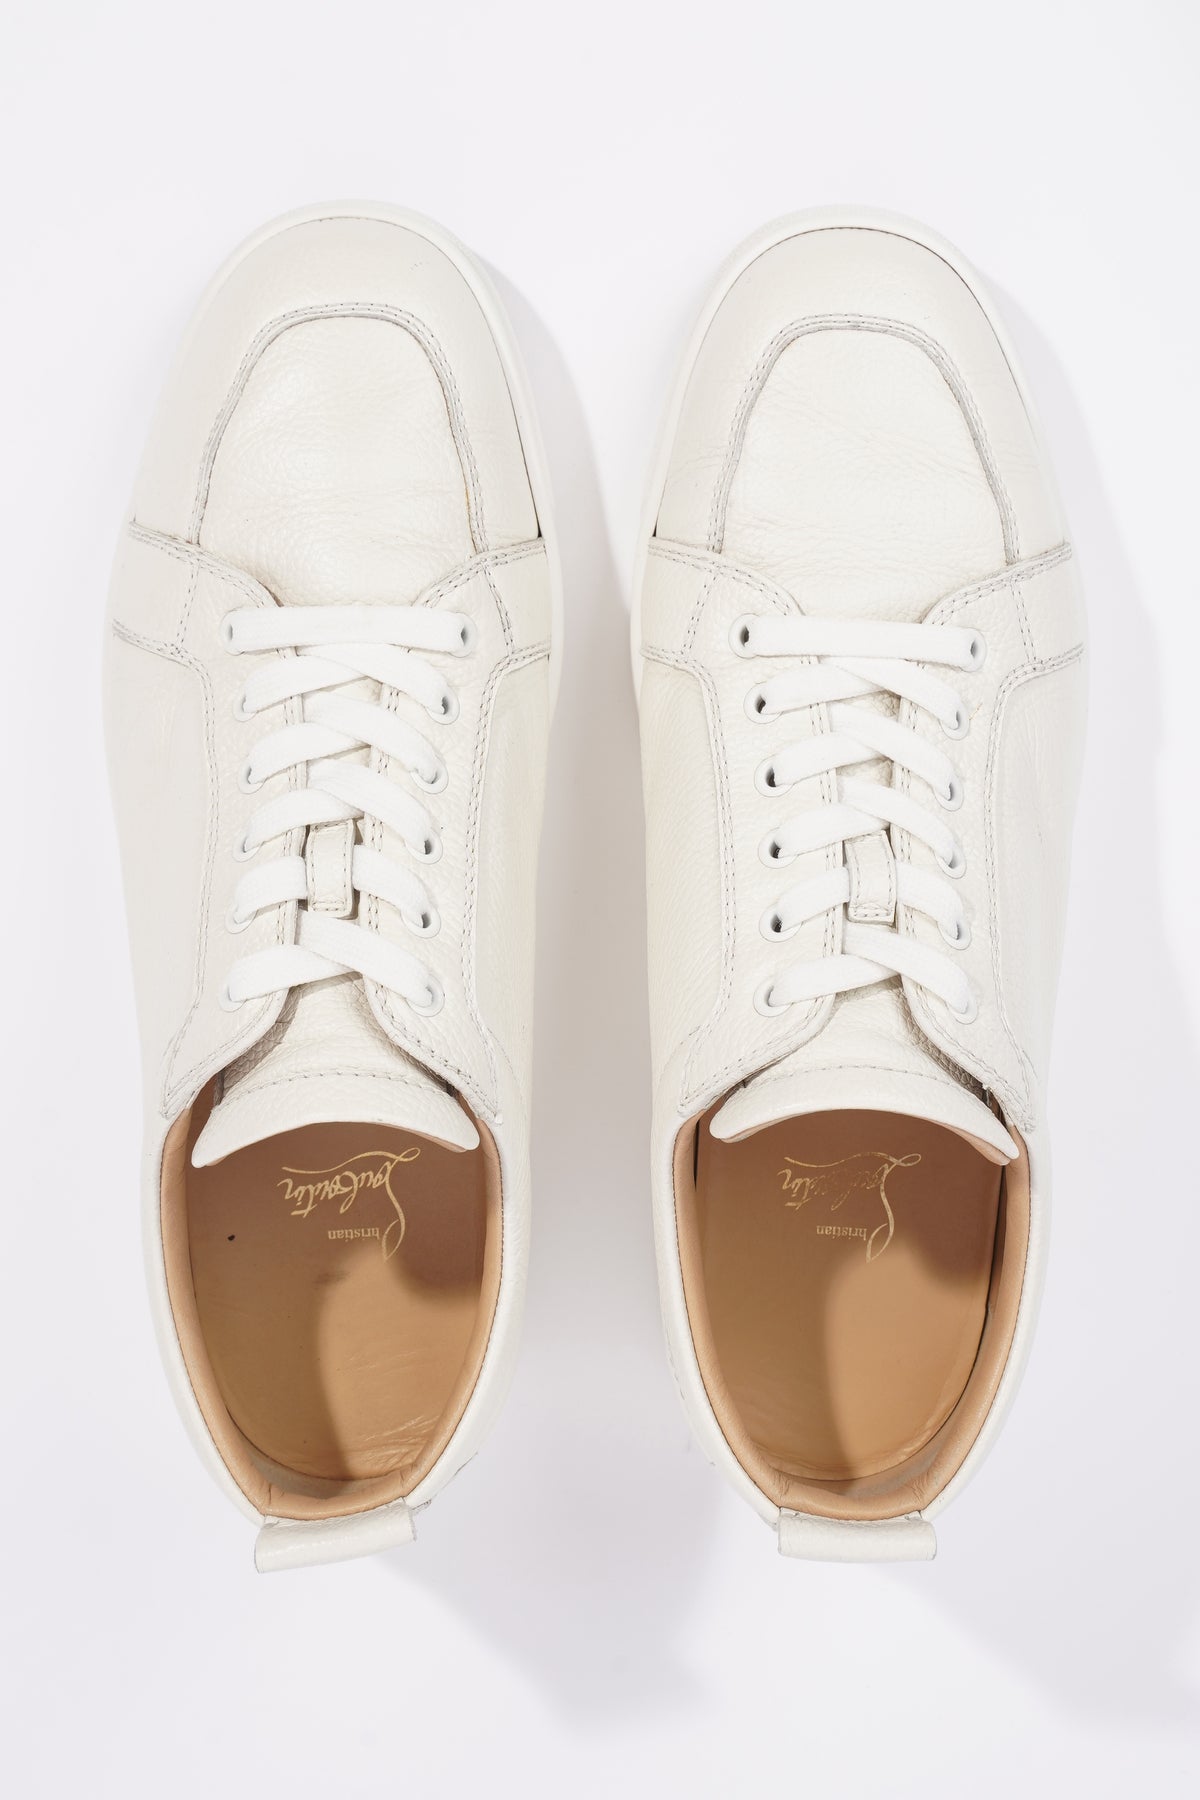 Louis leather low trainers Christian Louboutin White size 44 EU in Leather  - 36695825